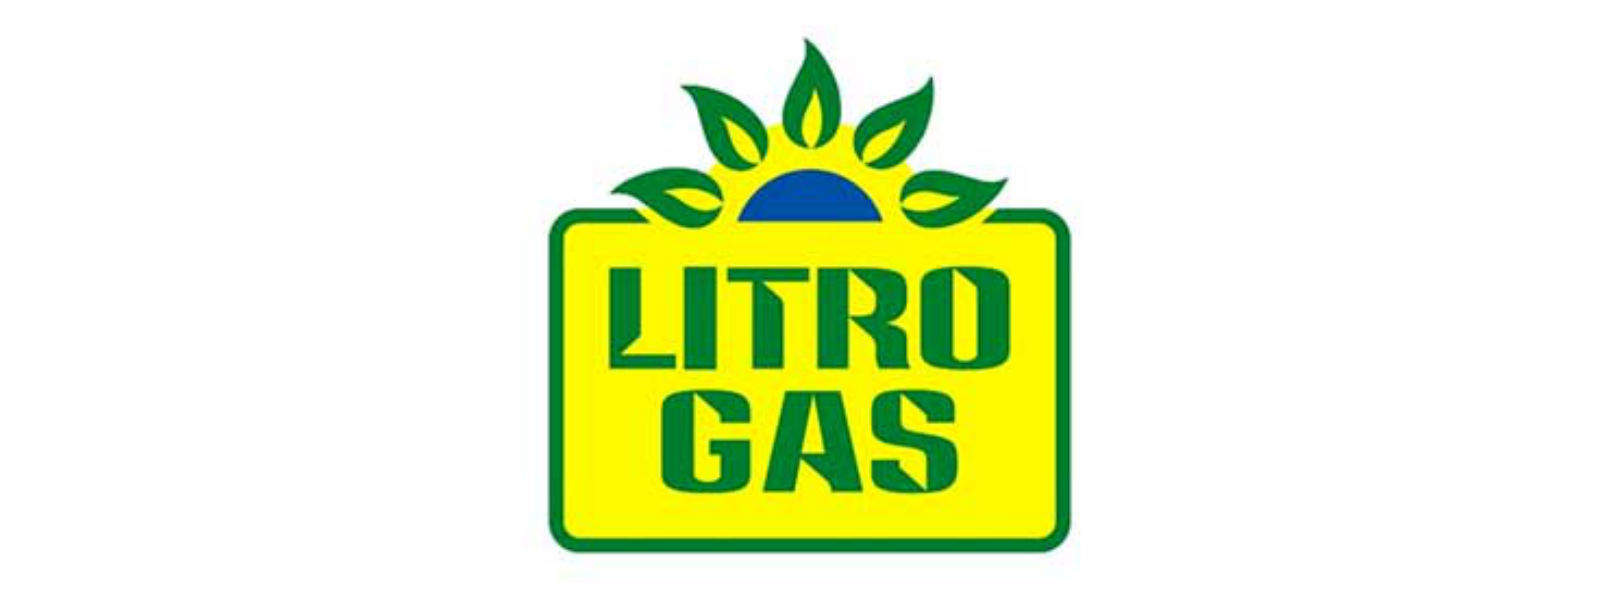 Loss of Rs. 250Mn daily due to low-prices: Litro